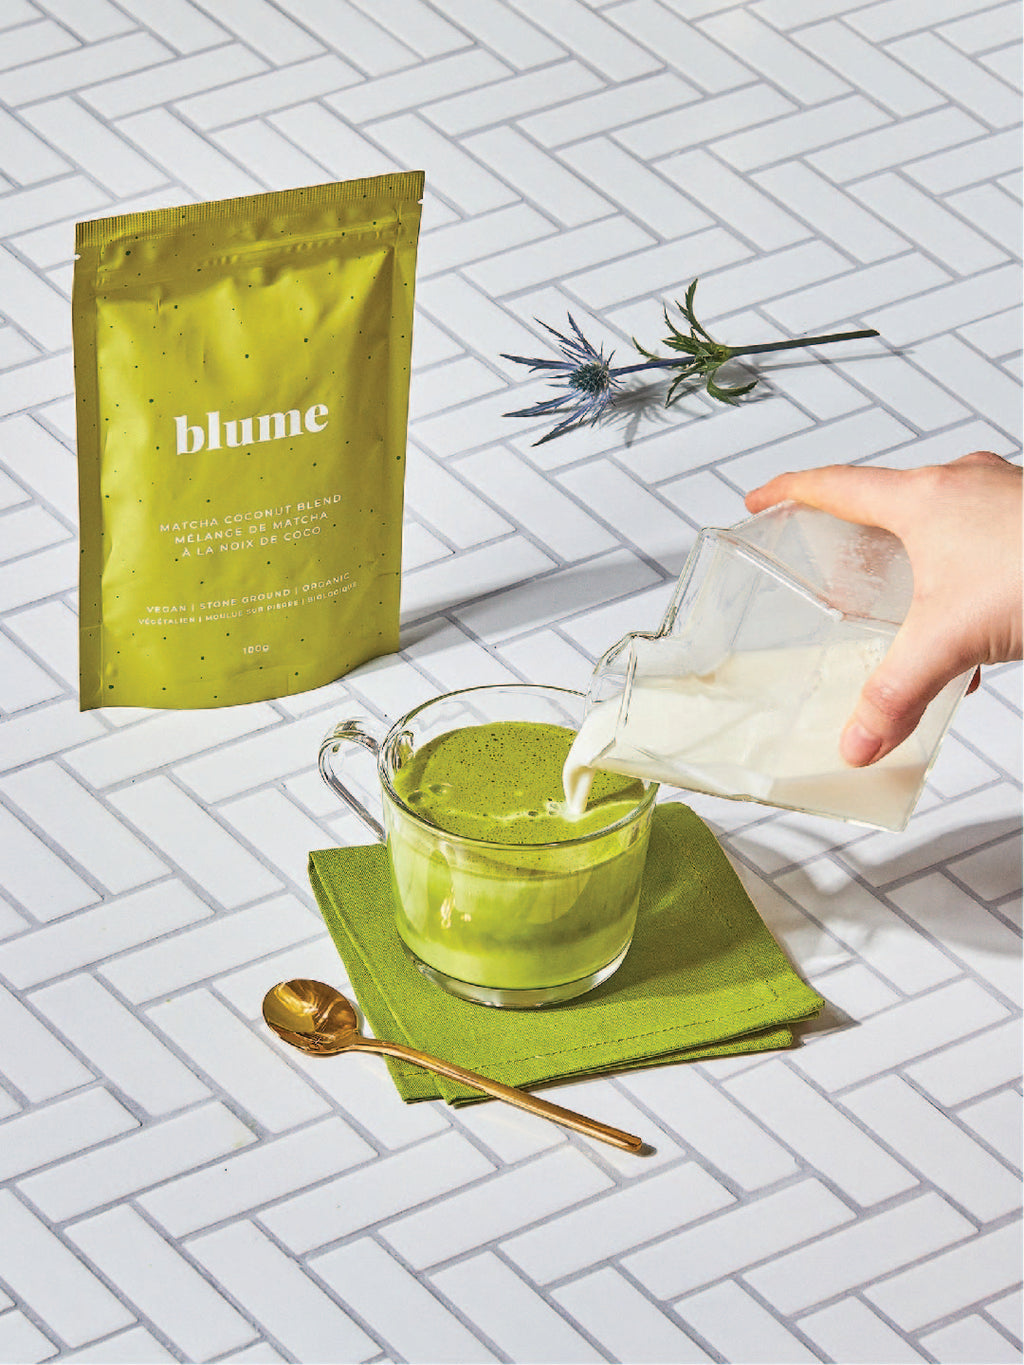 Matcha Coconut Blend by Blume